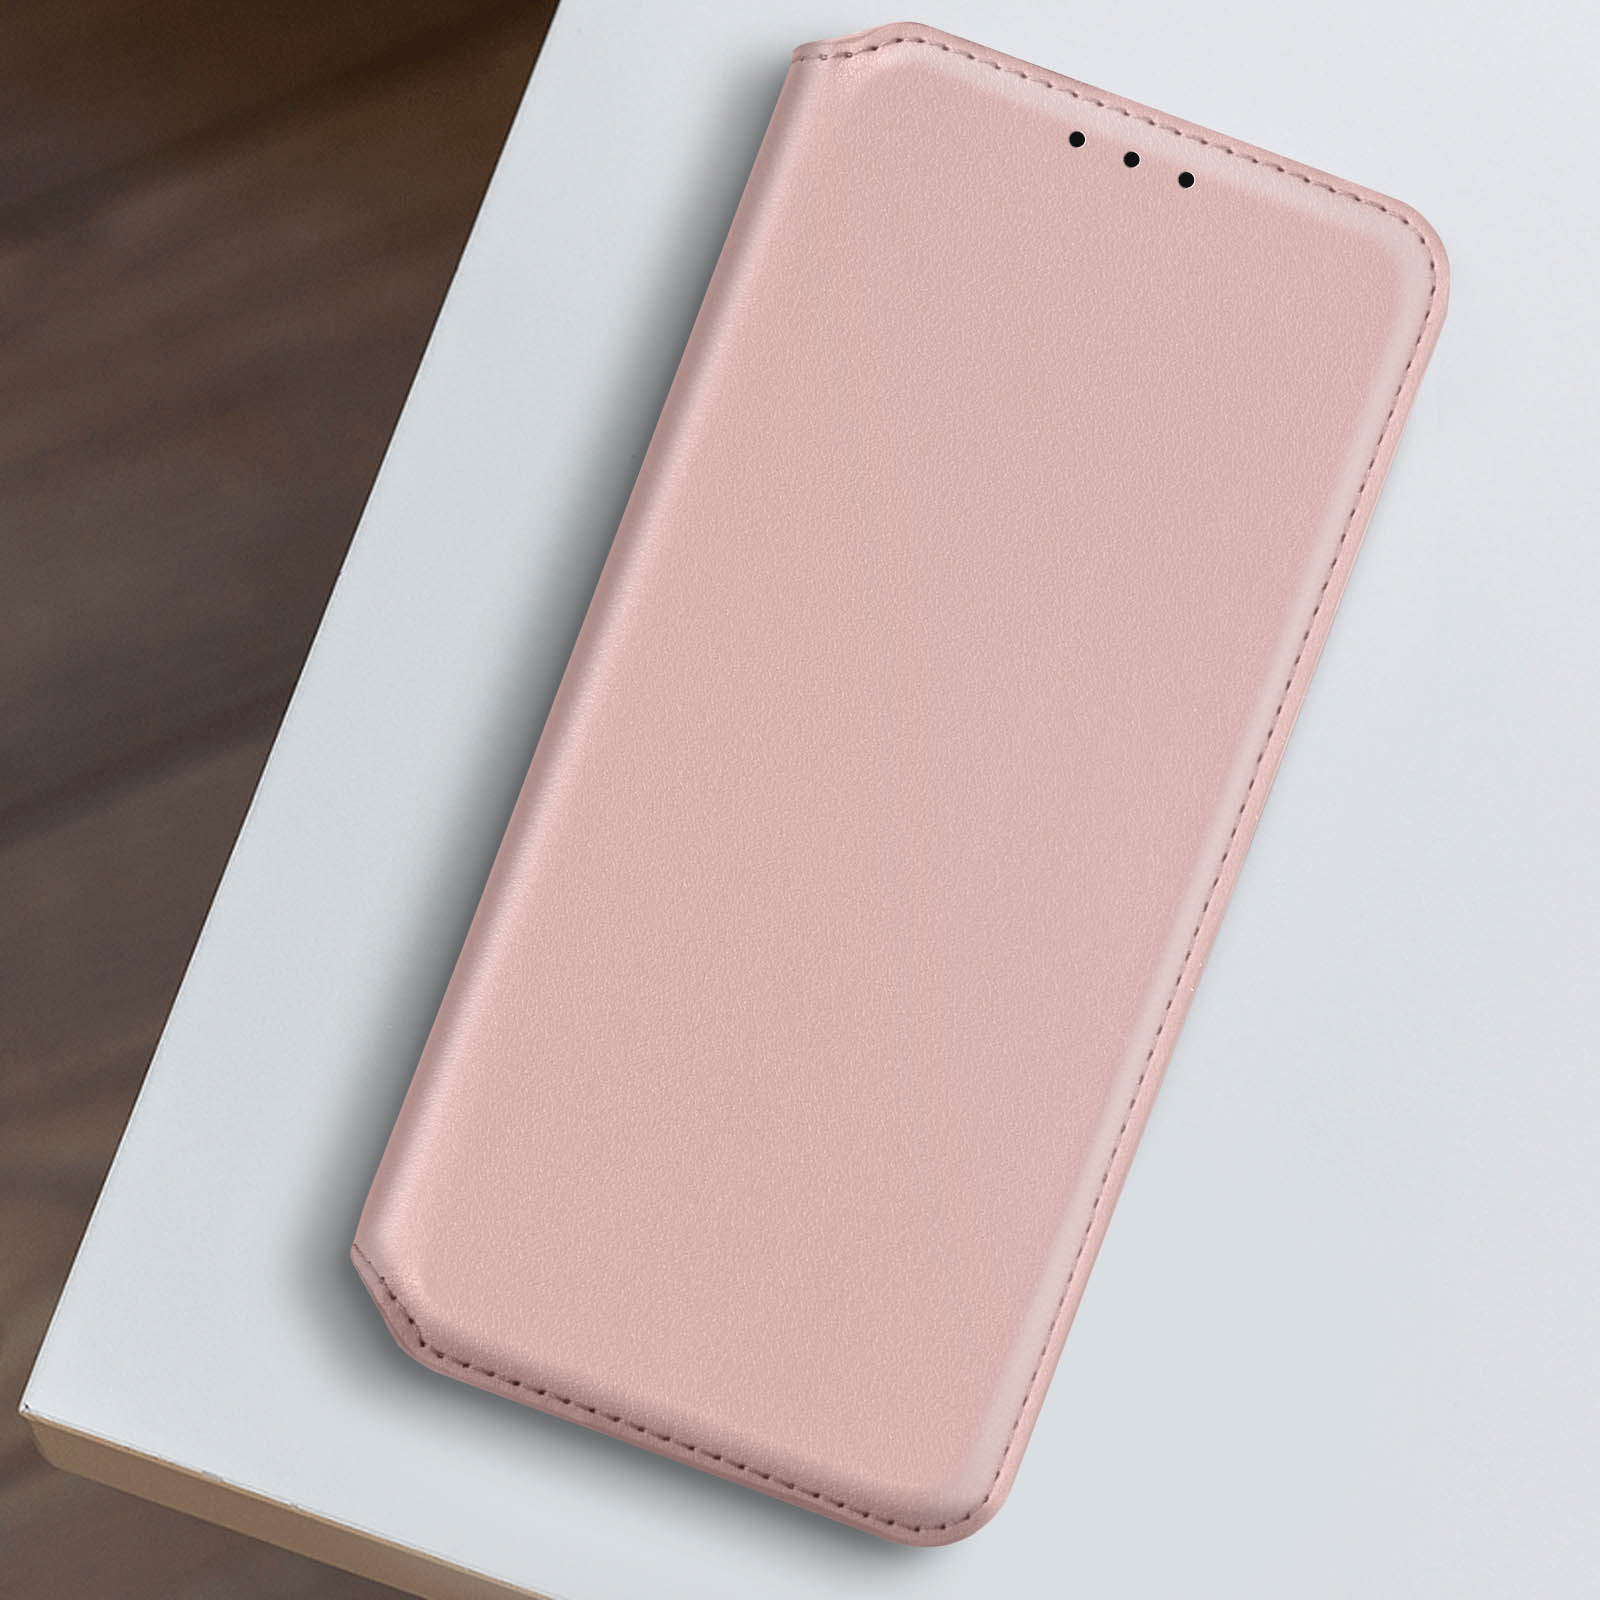 AVIZAR Classic Edition, Series, Backcover Magnetklappe Bookcover, Huawei, Y5p, Rosegold Huawei mit